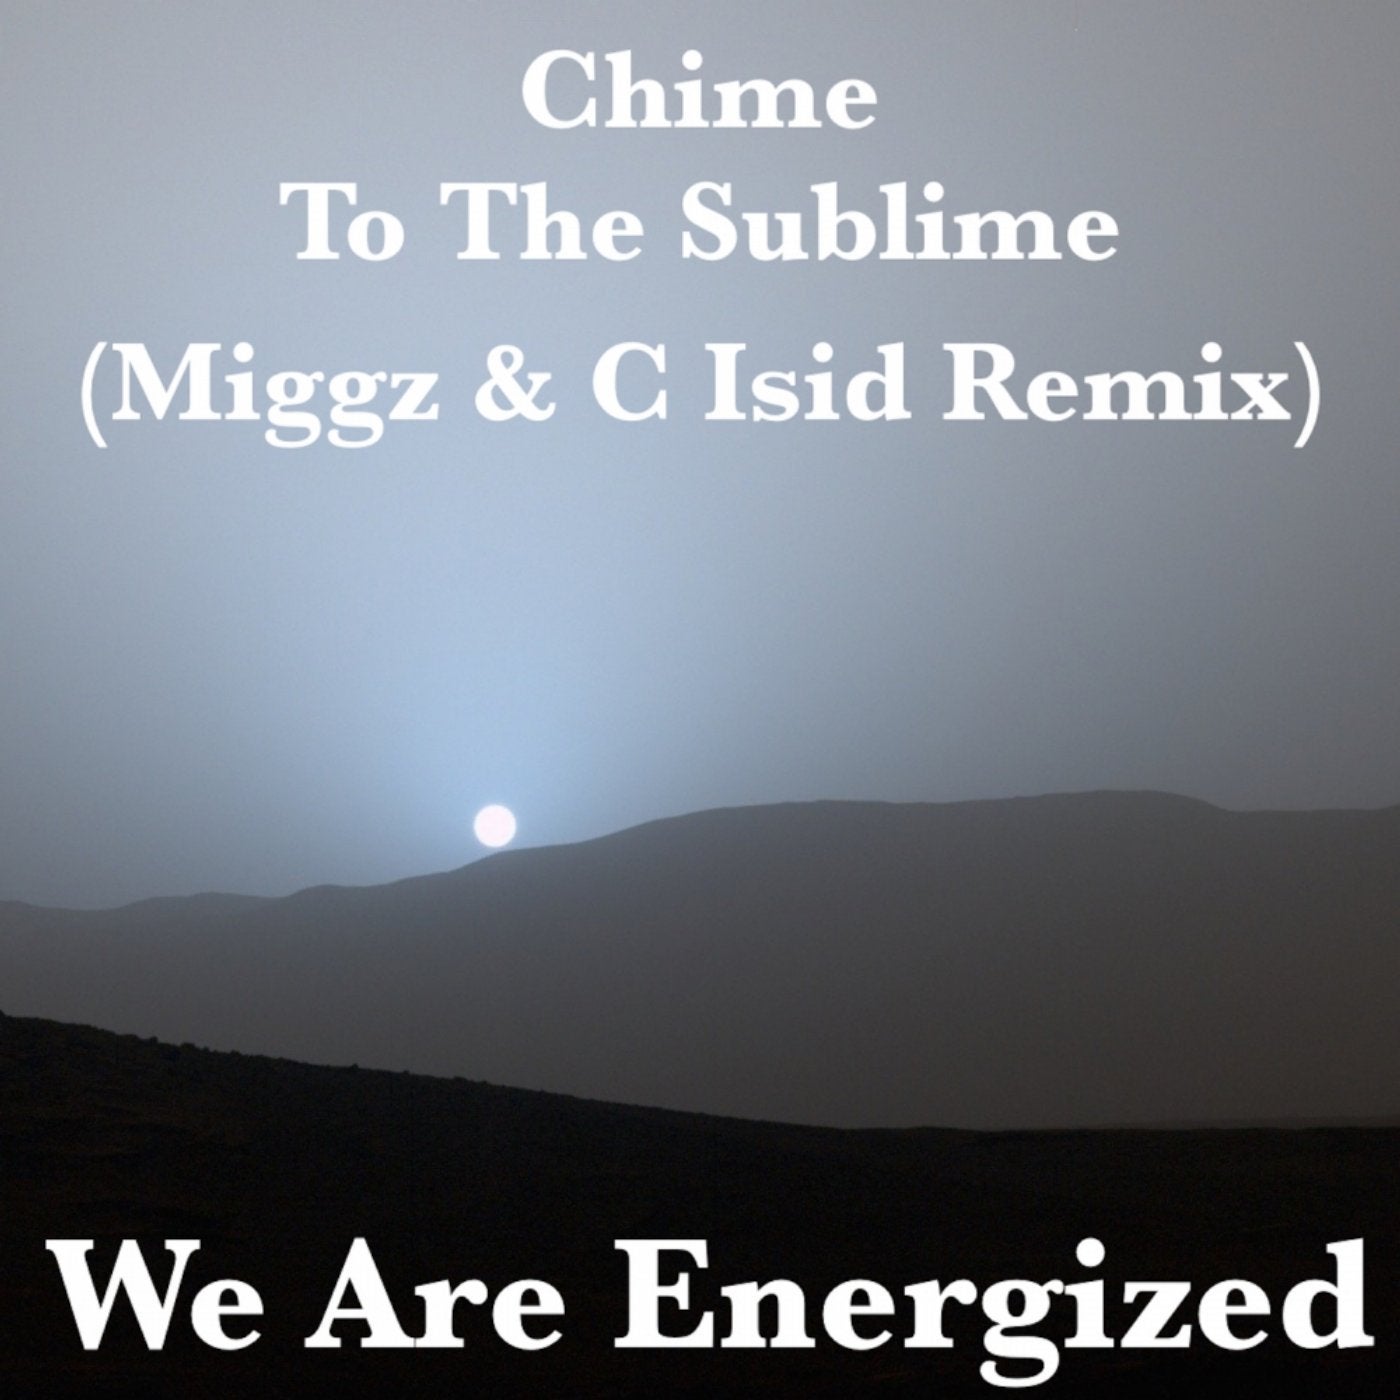 Chime To The Sublime (Miggz & C Isid Remix)